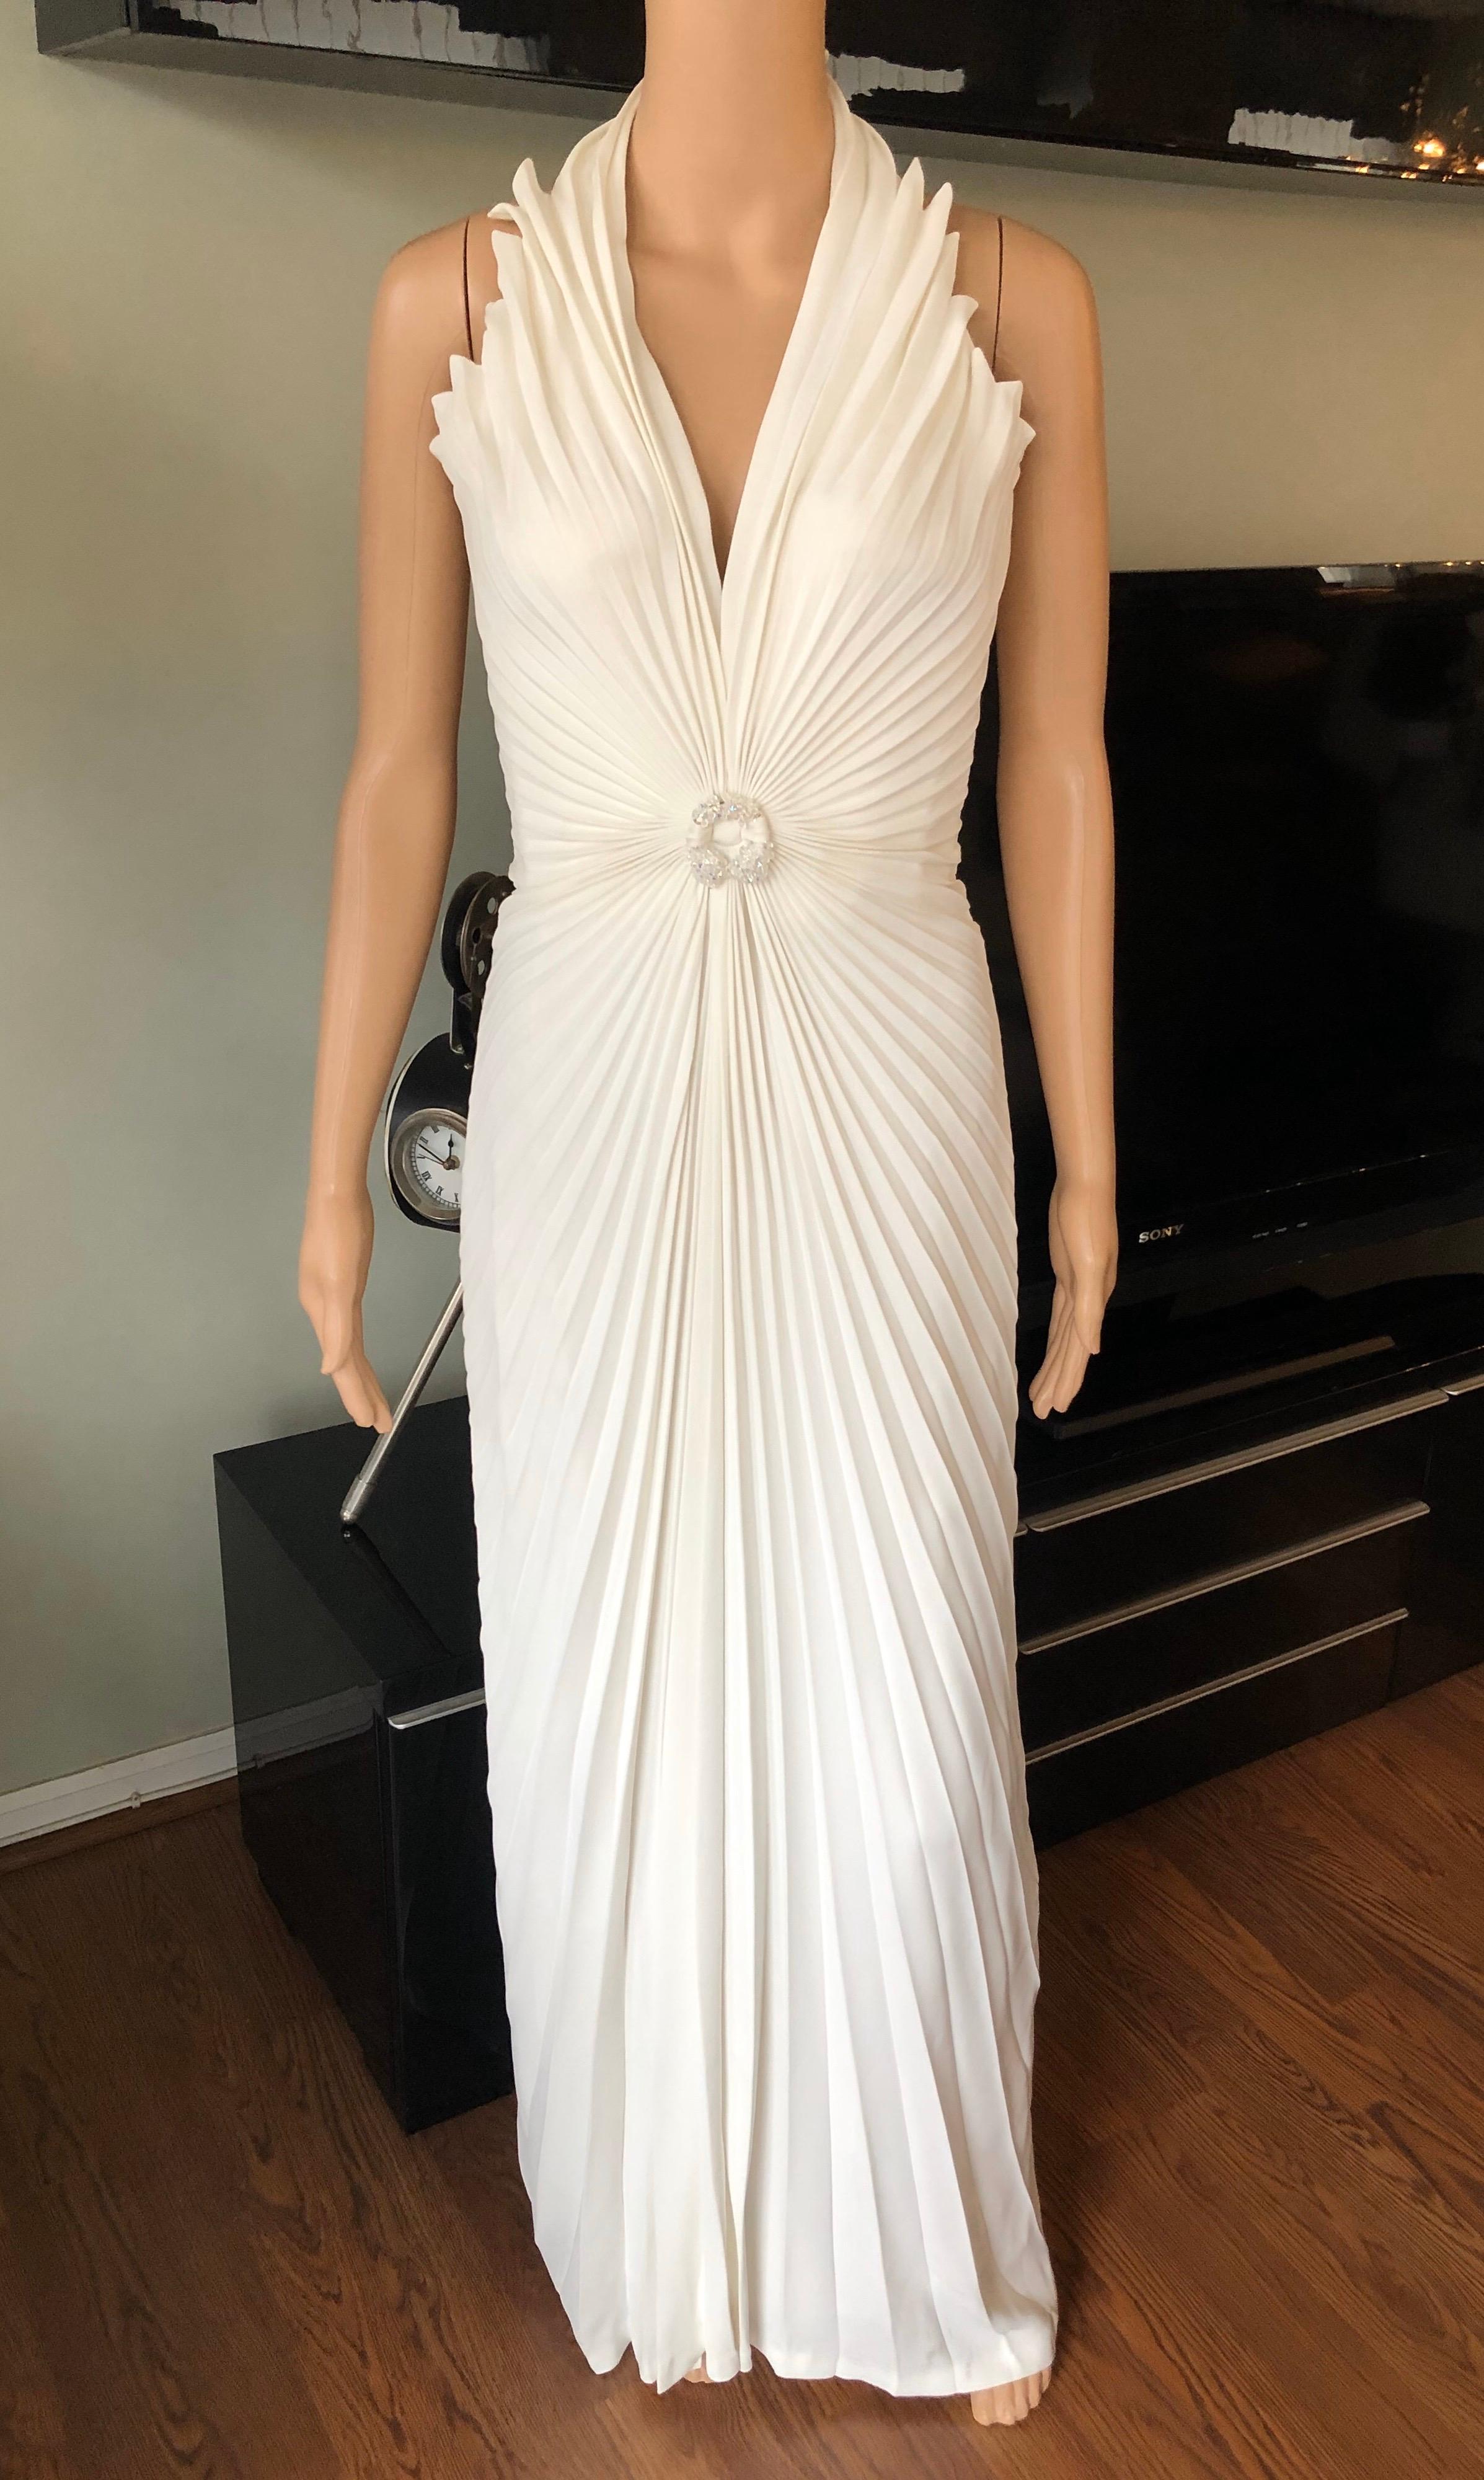 Thierry Mugler Vintage Embellished Ivory Evening Dress Gown FR 40

Thierry Mugler halter evening dress featuring pleated trim throughout, faux jewel embellishments at front and concealed zip closure at back.
